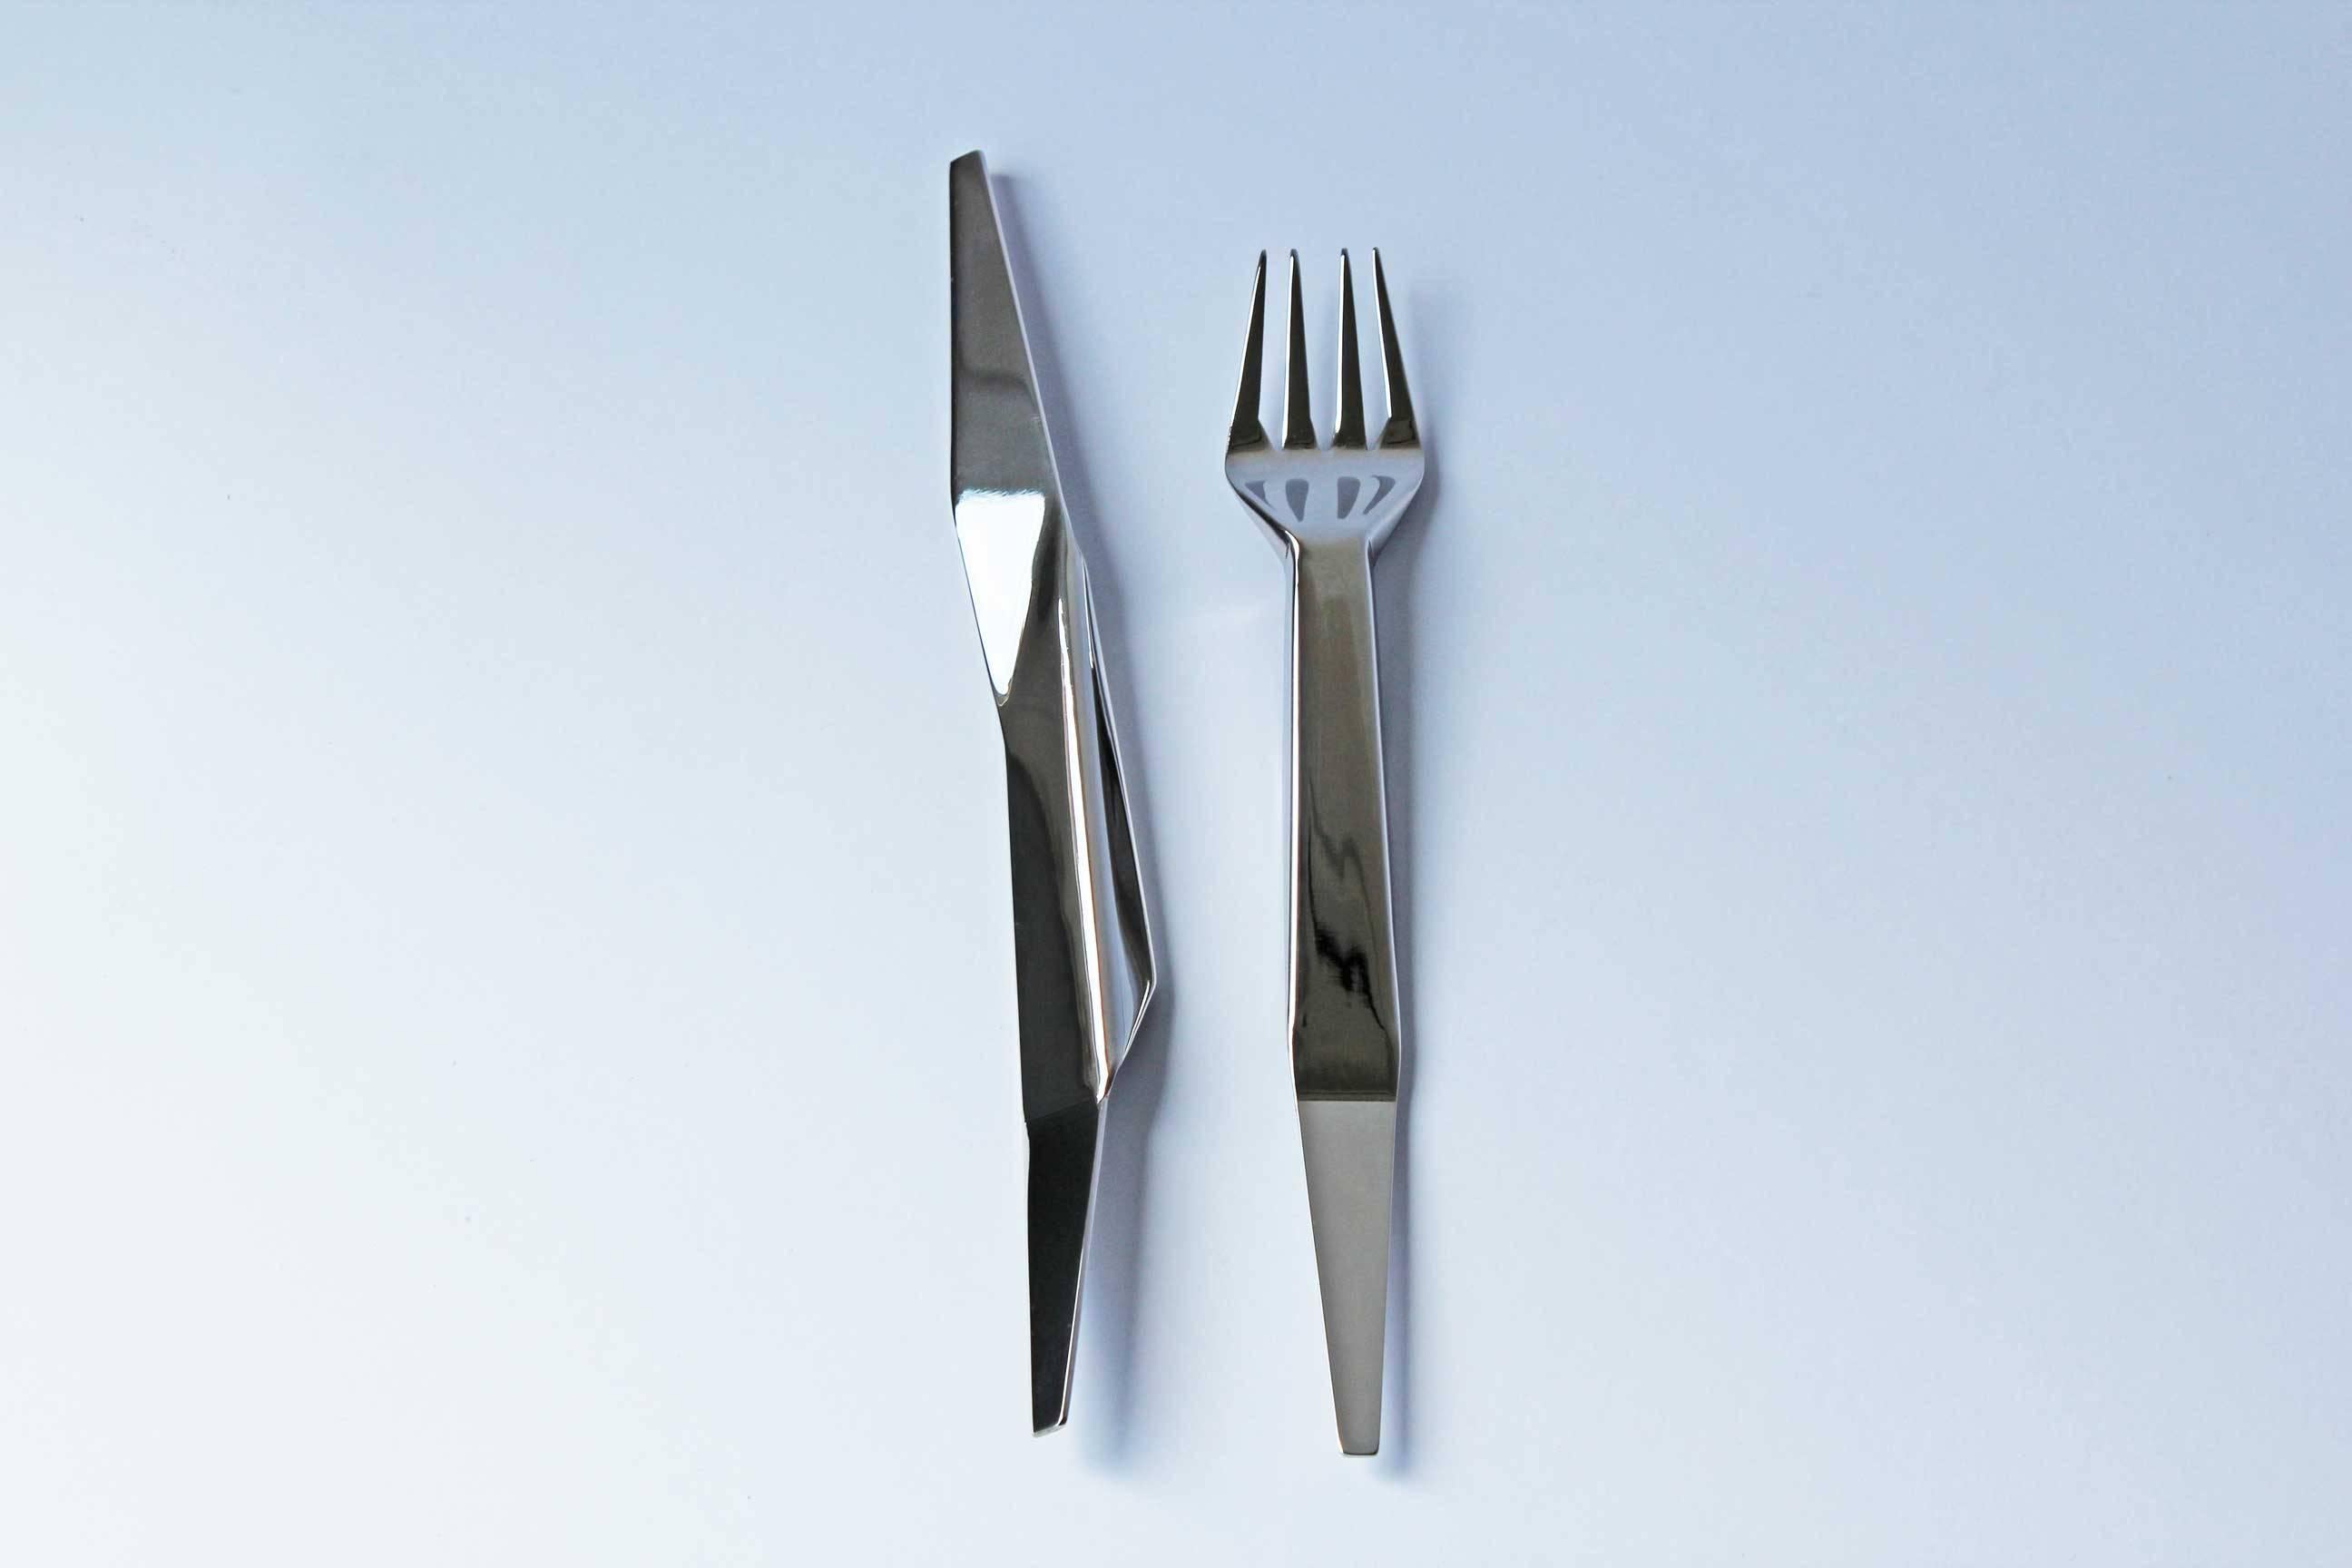 Cutlery set by Agnieszka Krzyżanowska, editions Philolux, 2016. Six forks and six knives, made of stainless steel and designed with the fragile folds of paper in mind. With strong material and sensitive design, the set comes to life. The surface of